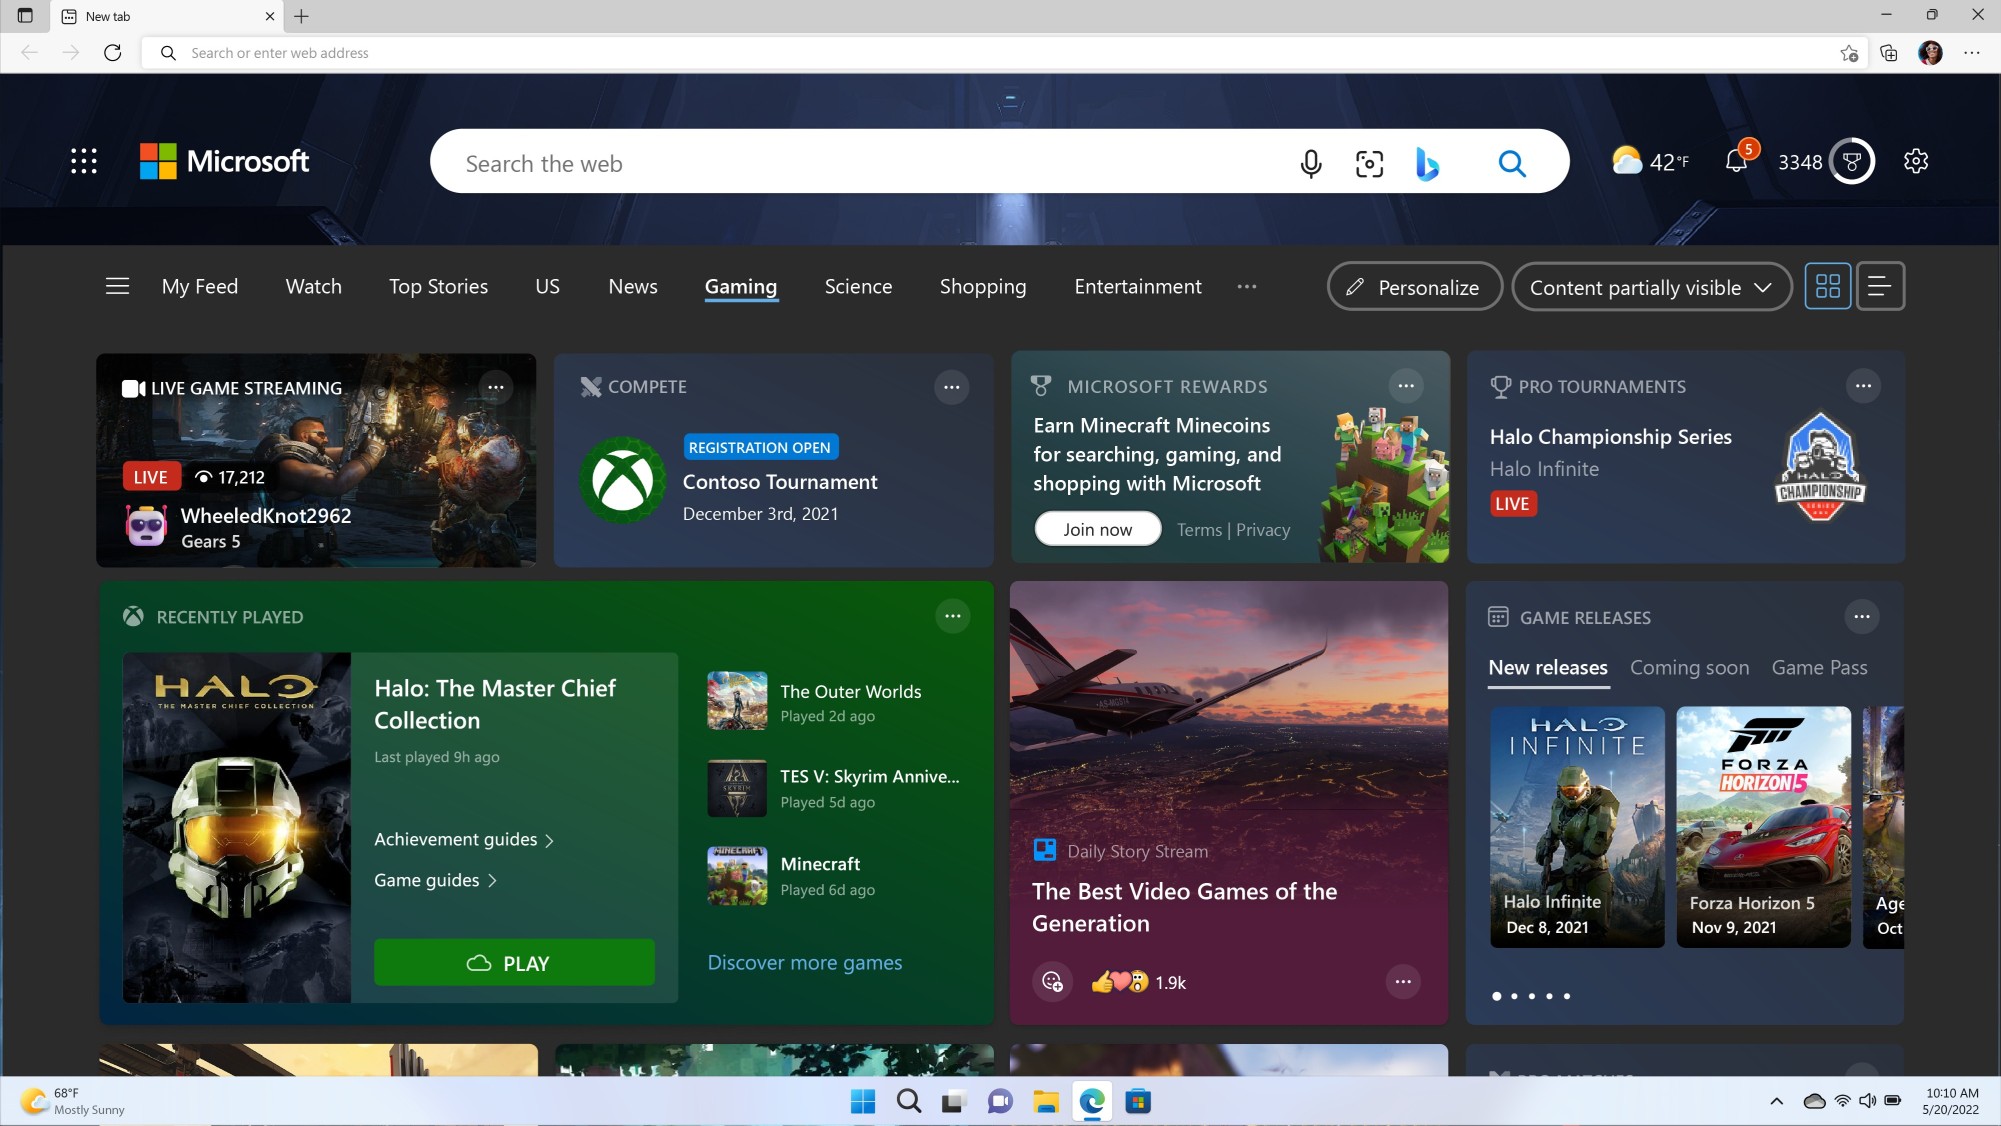 Microsoft's new Xbox Game Bar launches for Windows 10 as a useful